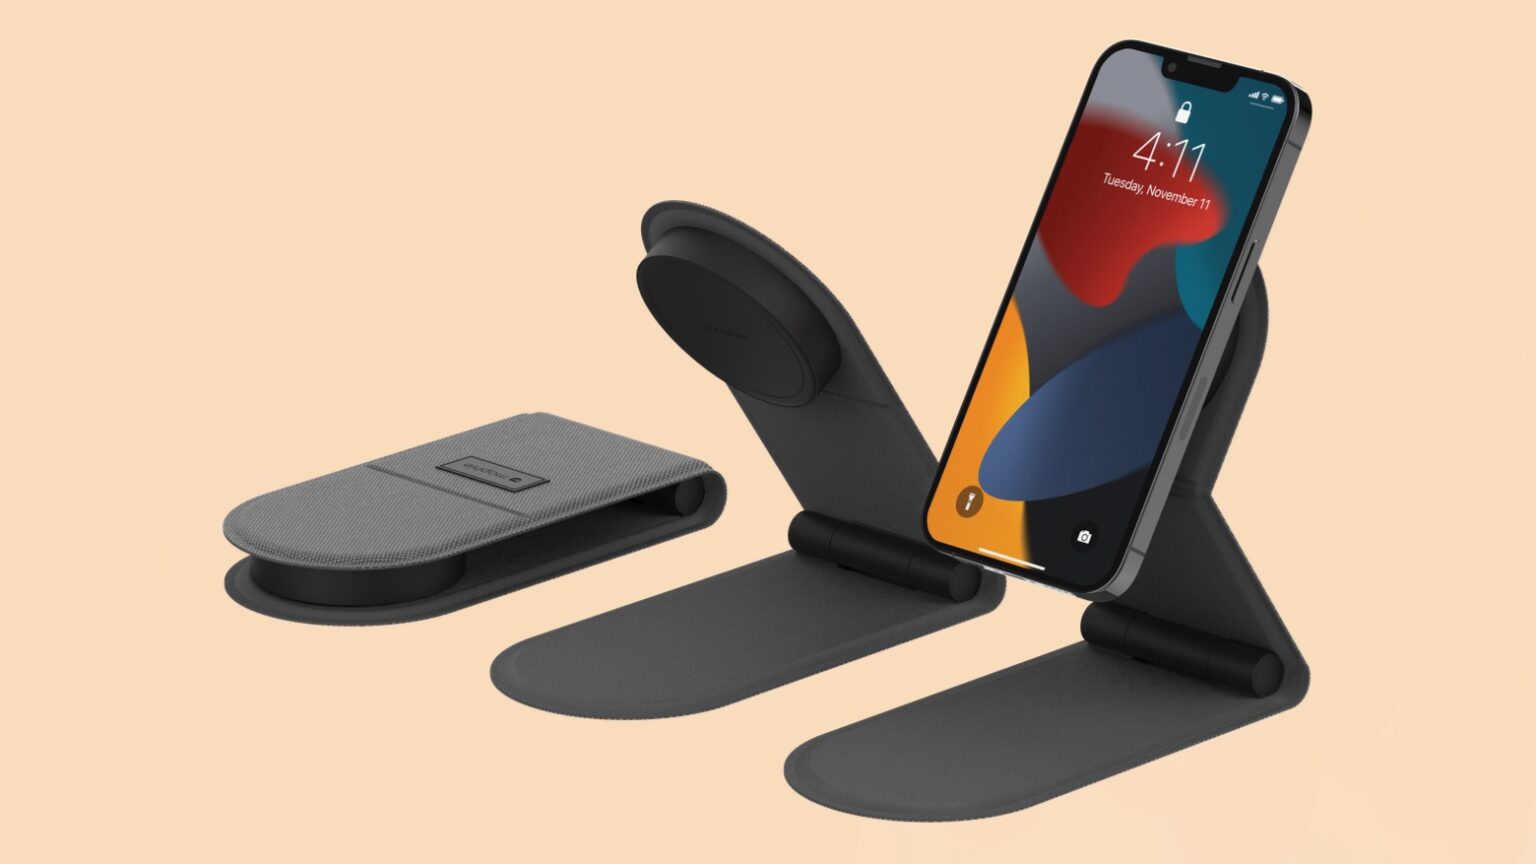 Mophie foldable iPhone stand is small enough to take anywhere